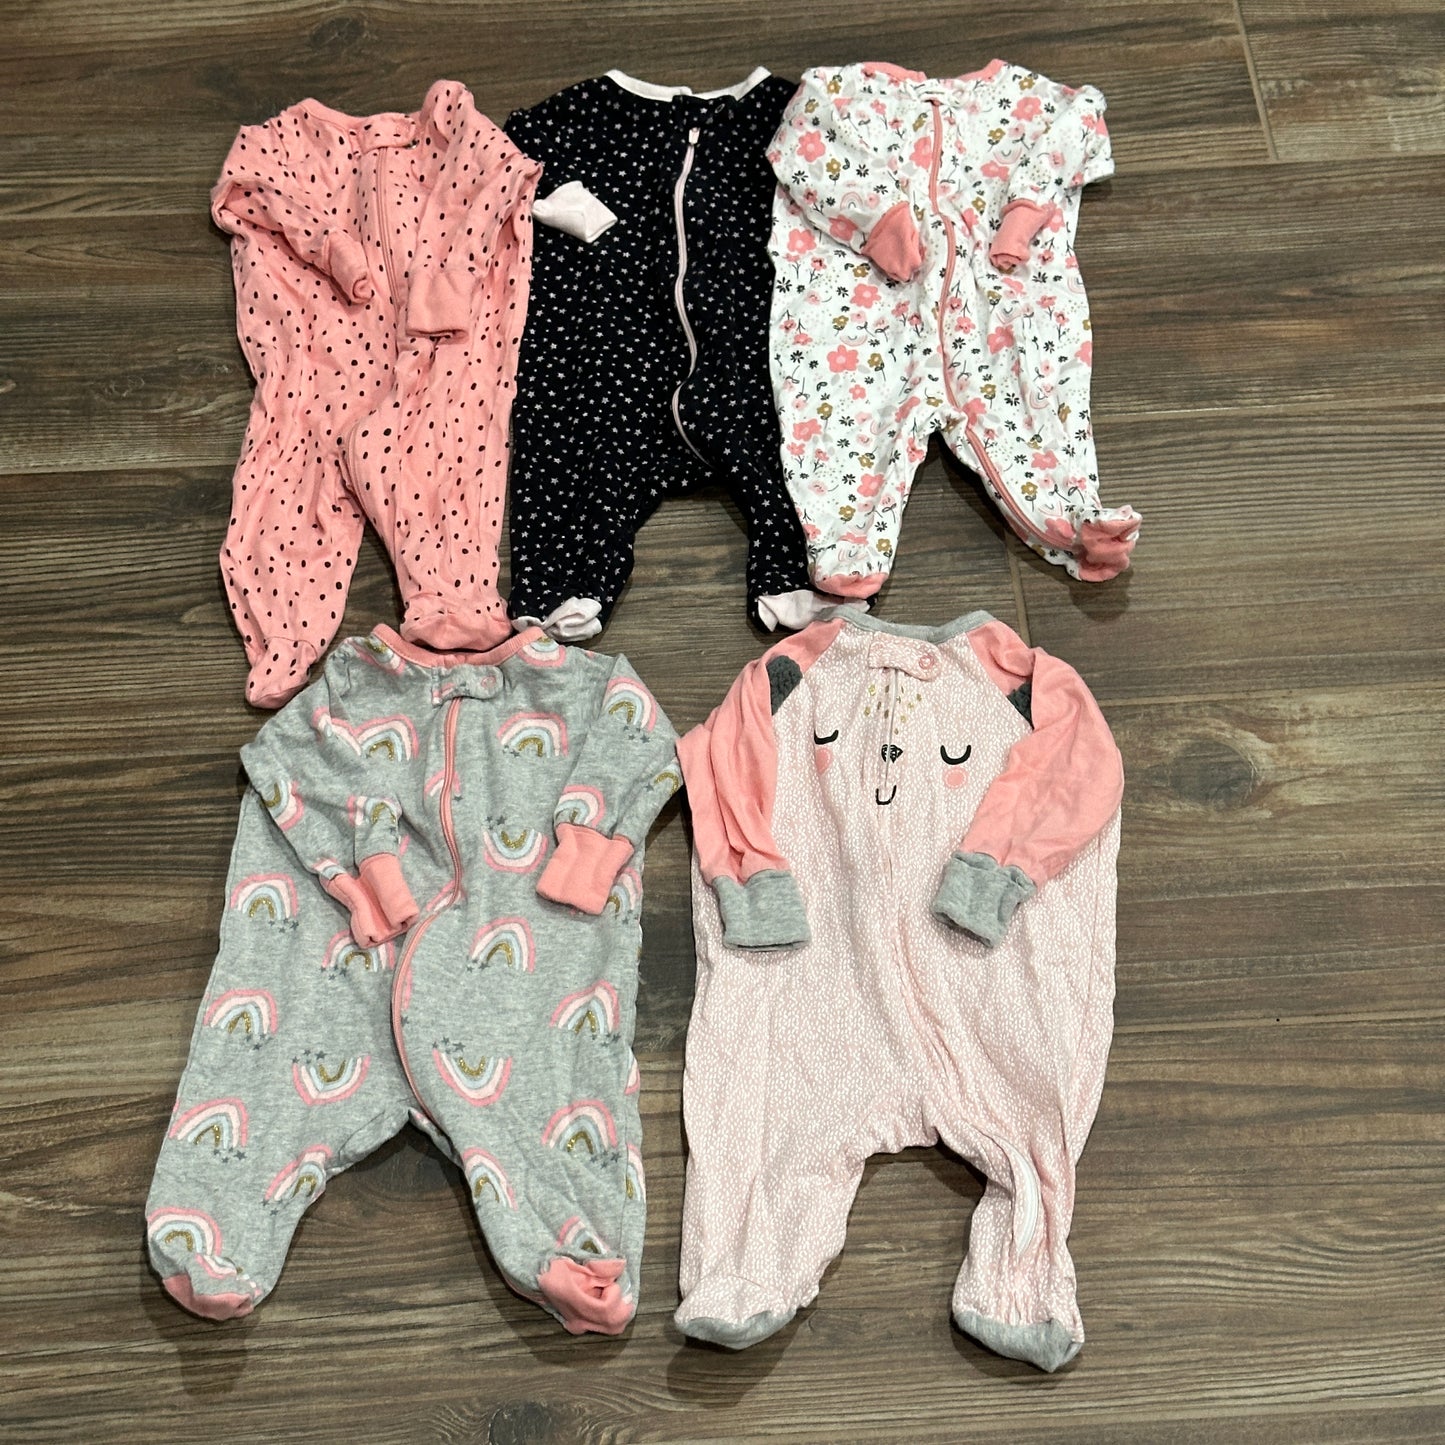 Girls Size Newborn Gerber Footie Lot (5 Pieces) - Good Used Condition